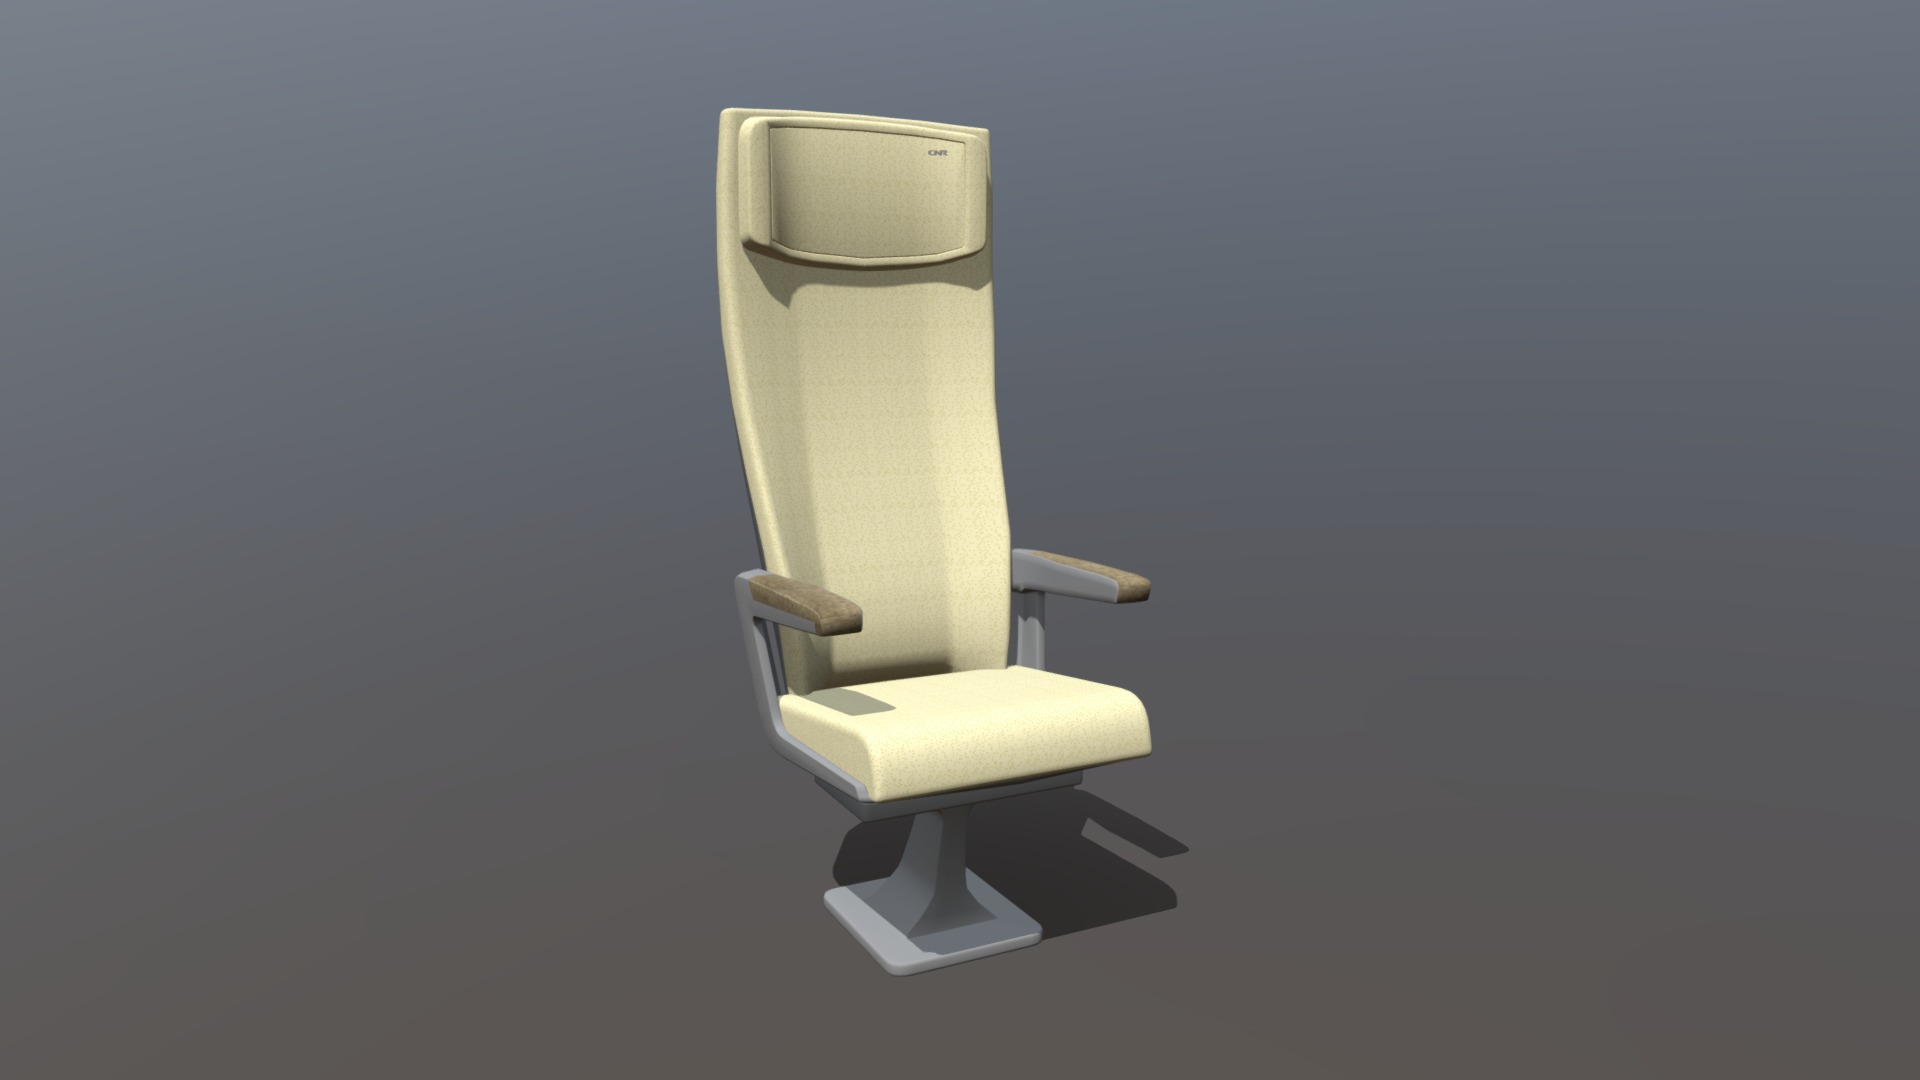 3D model Railway High Speed Railway Seats 013 - This is a 3D model of the Railway High Speed Railway Seats 013. The 3D model is about a white chair with a white back.